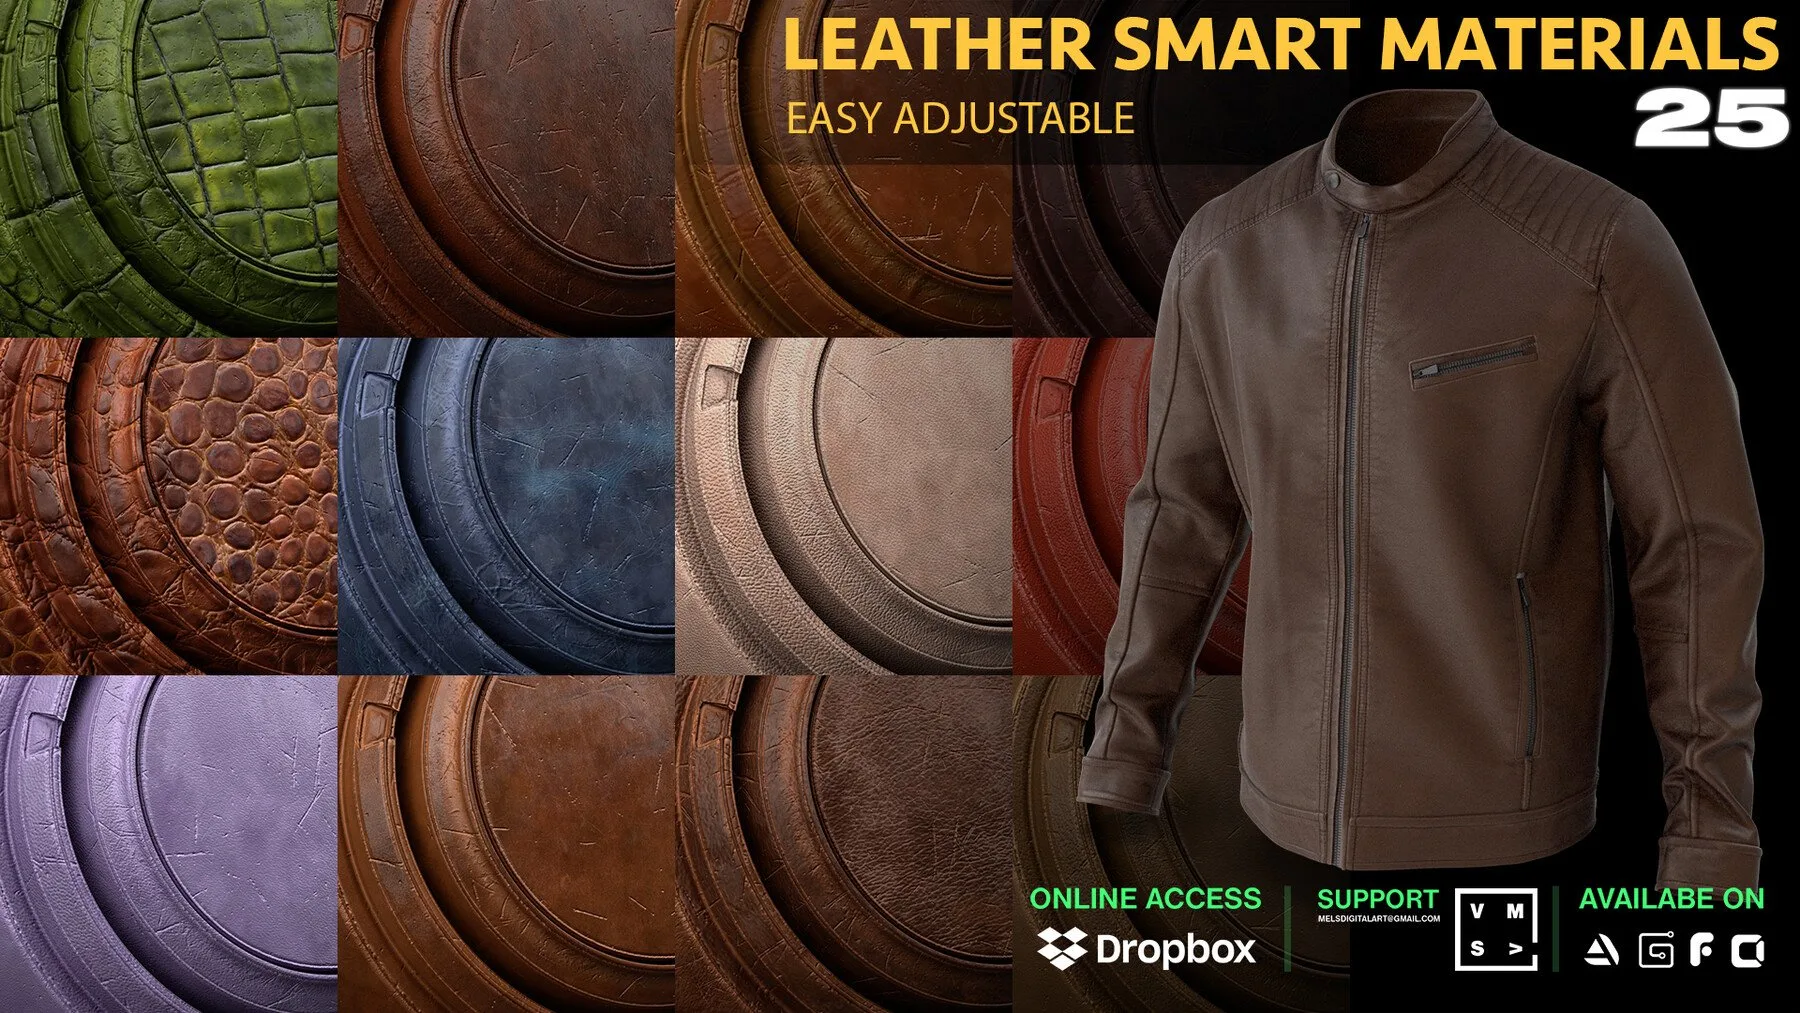 25 LEATHER SMART MATERIALS